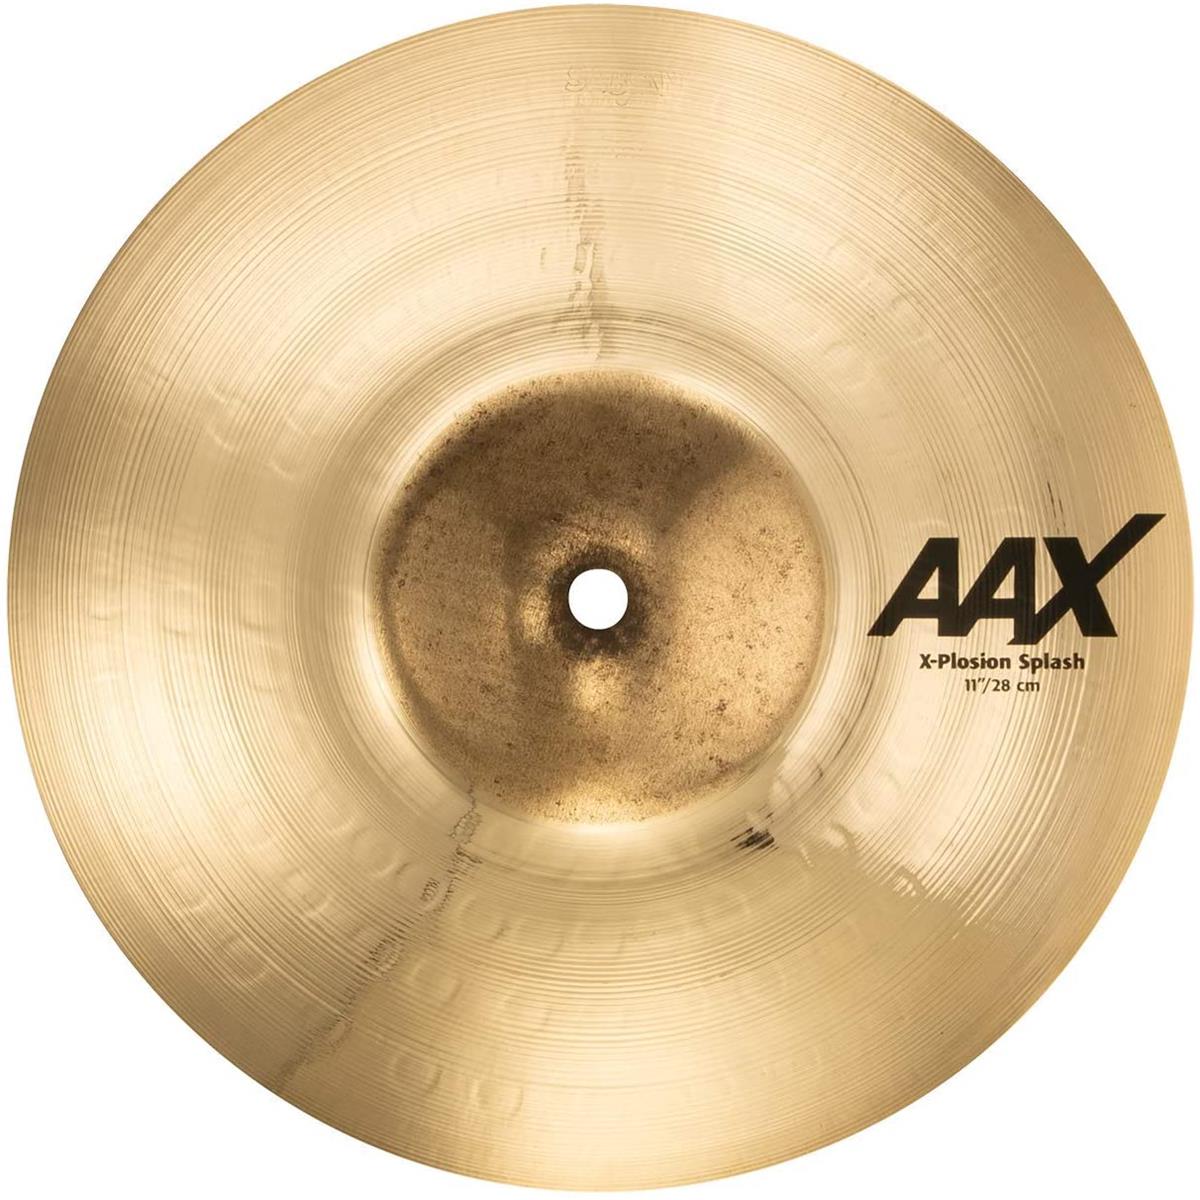 Sabian 11" AAX X-Plosion Splash Cymbal, Extra-Thin, Brilliant Finish Extremely fast and very bright, the SABIAN 110" AAX X-Plosion Splash provides plenty of penetrating cut. The SABIAN AAX series delivers consistently bright, crisp, clear and cutting responses  AAX is the ultimate Modern Bright sound!